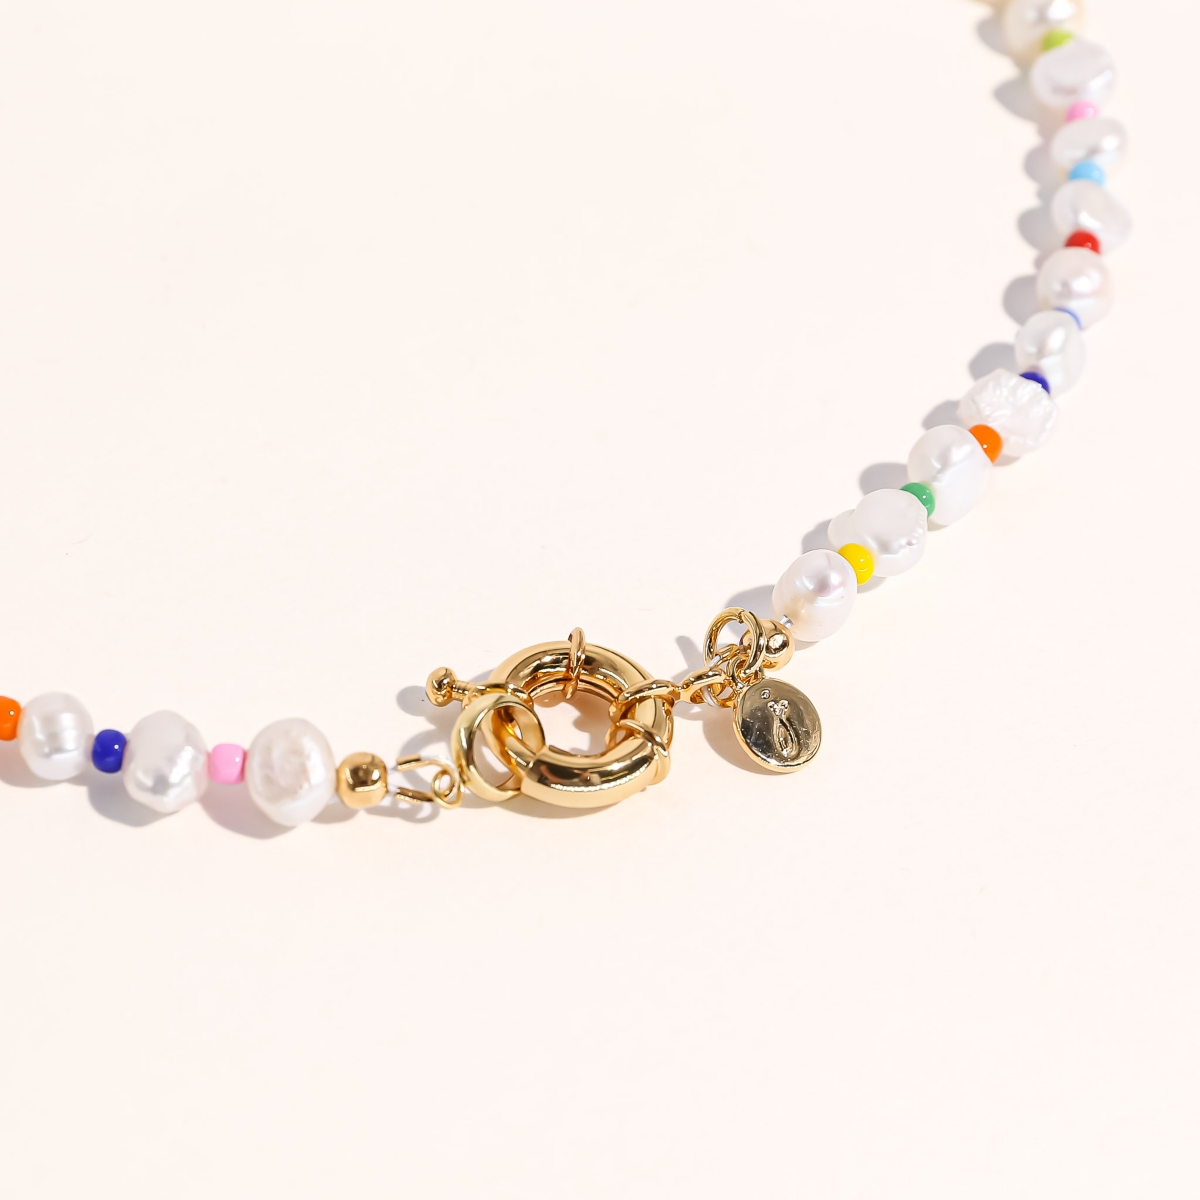 JOEY BABY 18K GOLD PLATED FRESHWATER PEARLS WITH COLORED GLASS BEADS